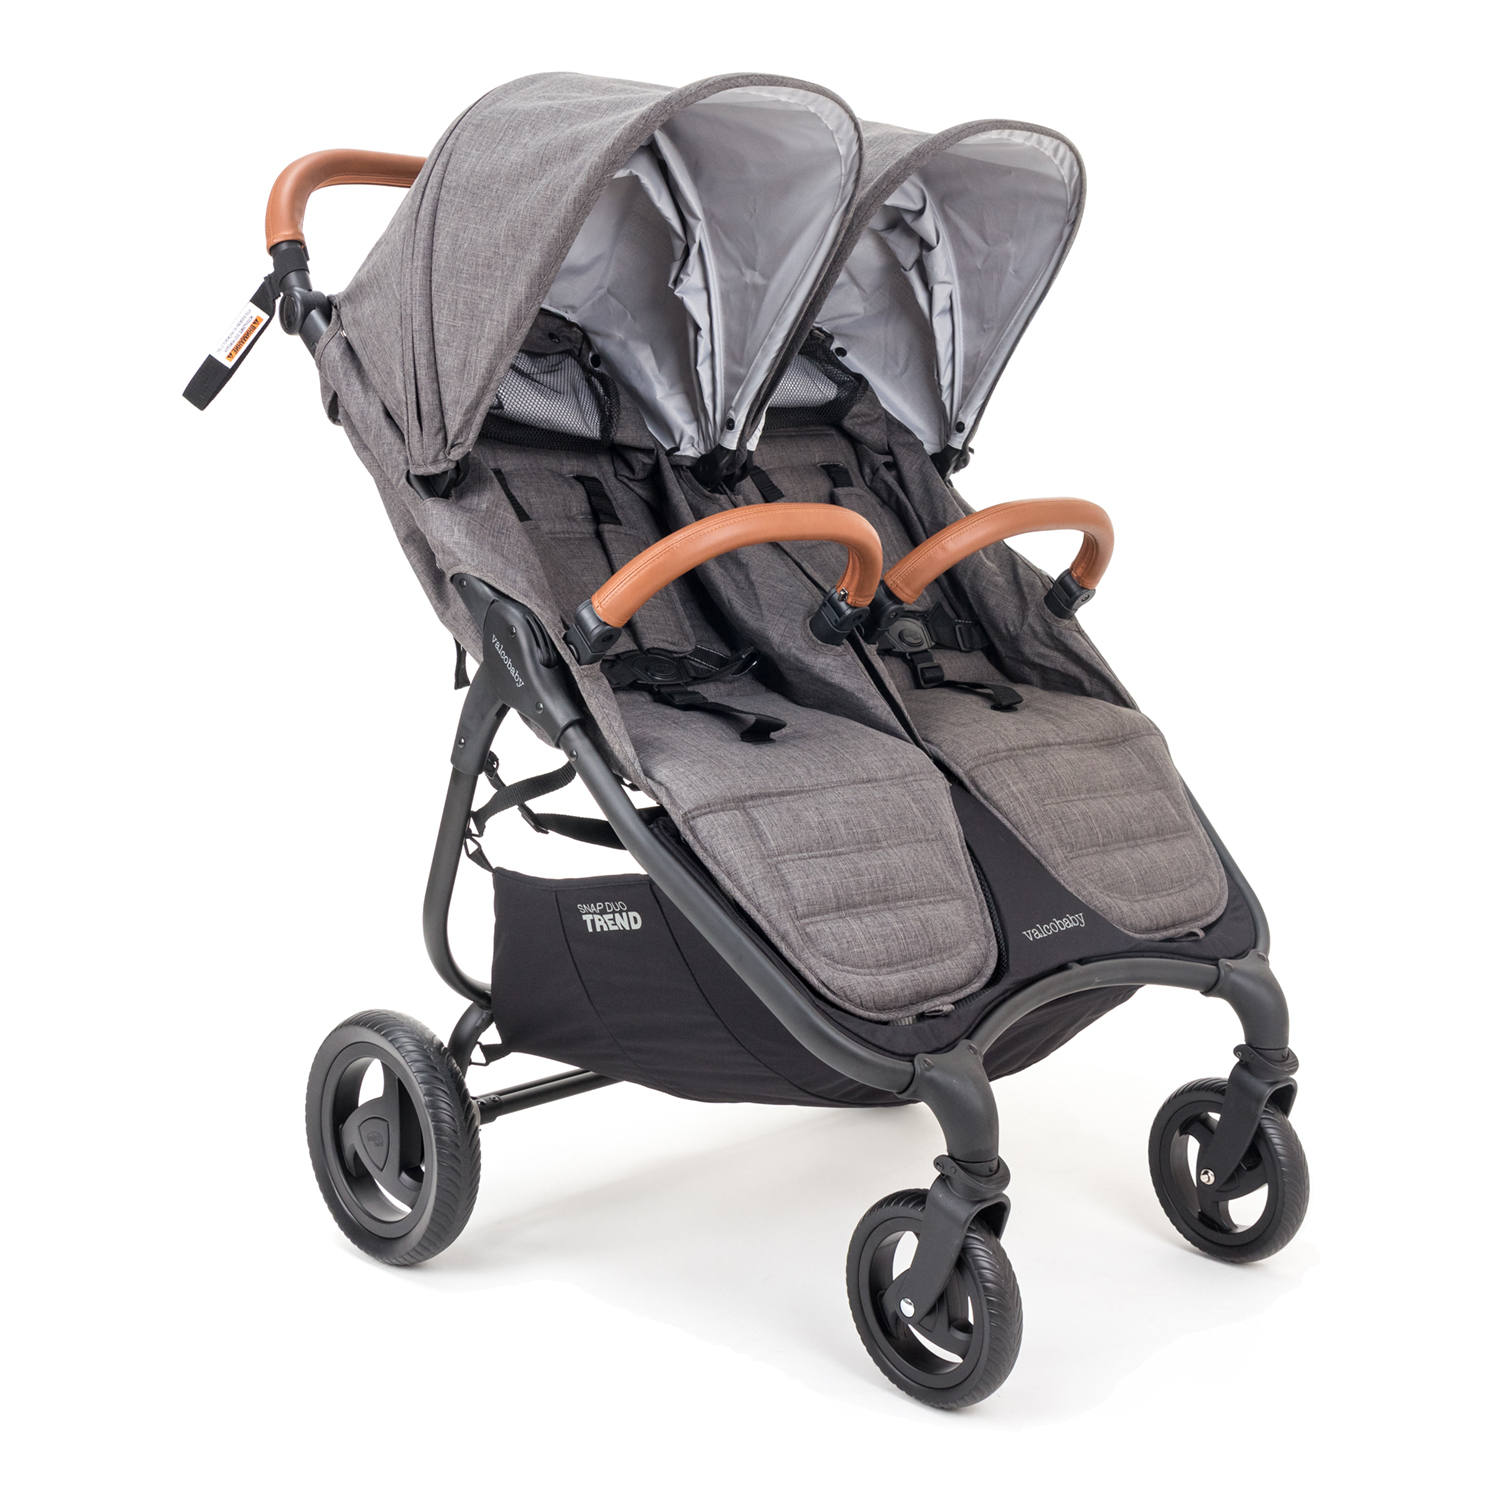 Прогулочная коляска Snap Duo Trend / Charcoal Valco Baby прогулочная коляска valco baby snap 4 trend charcoal